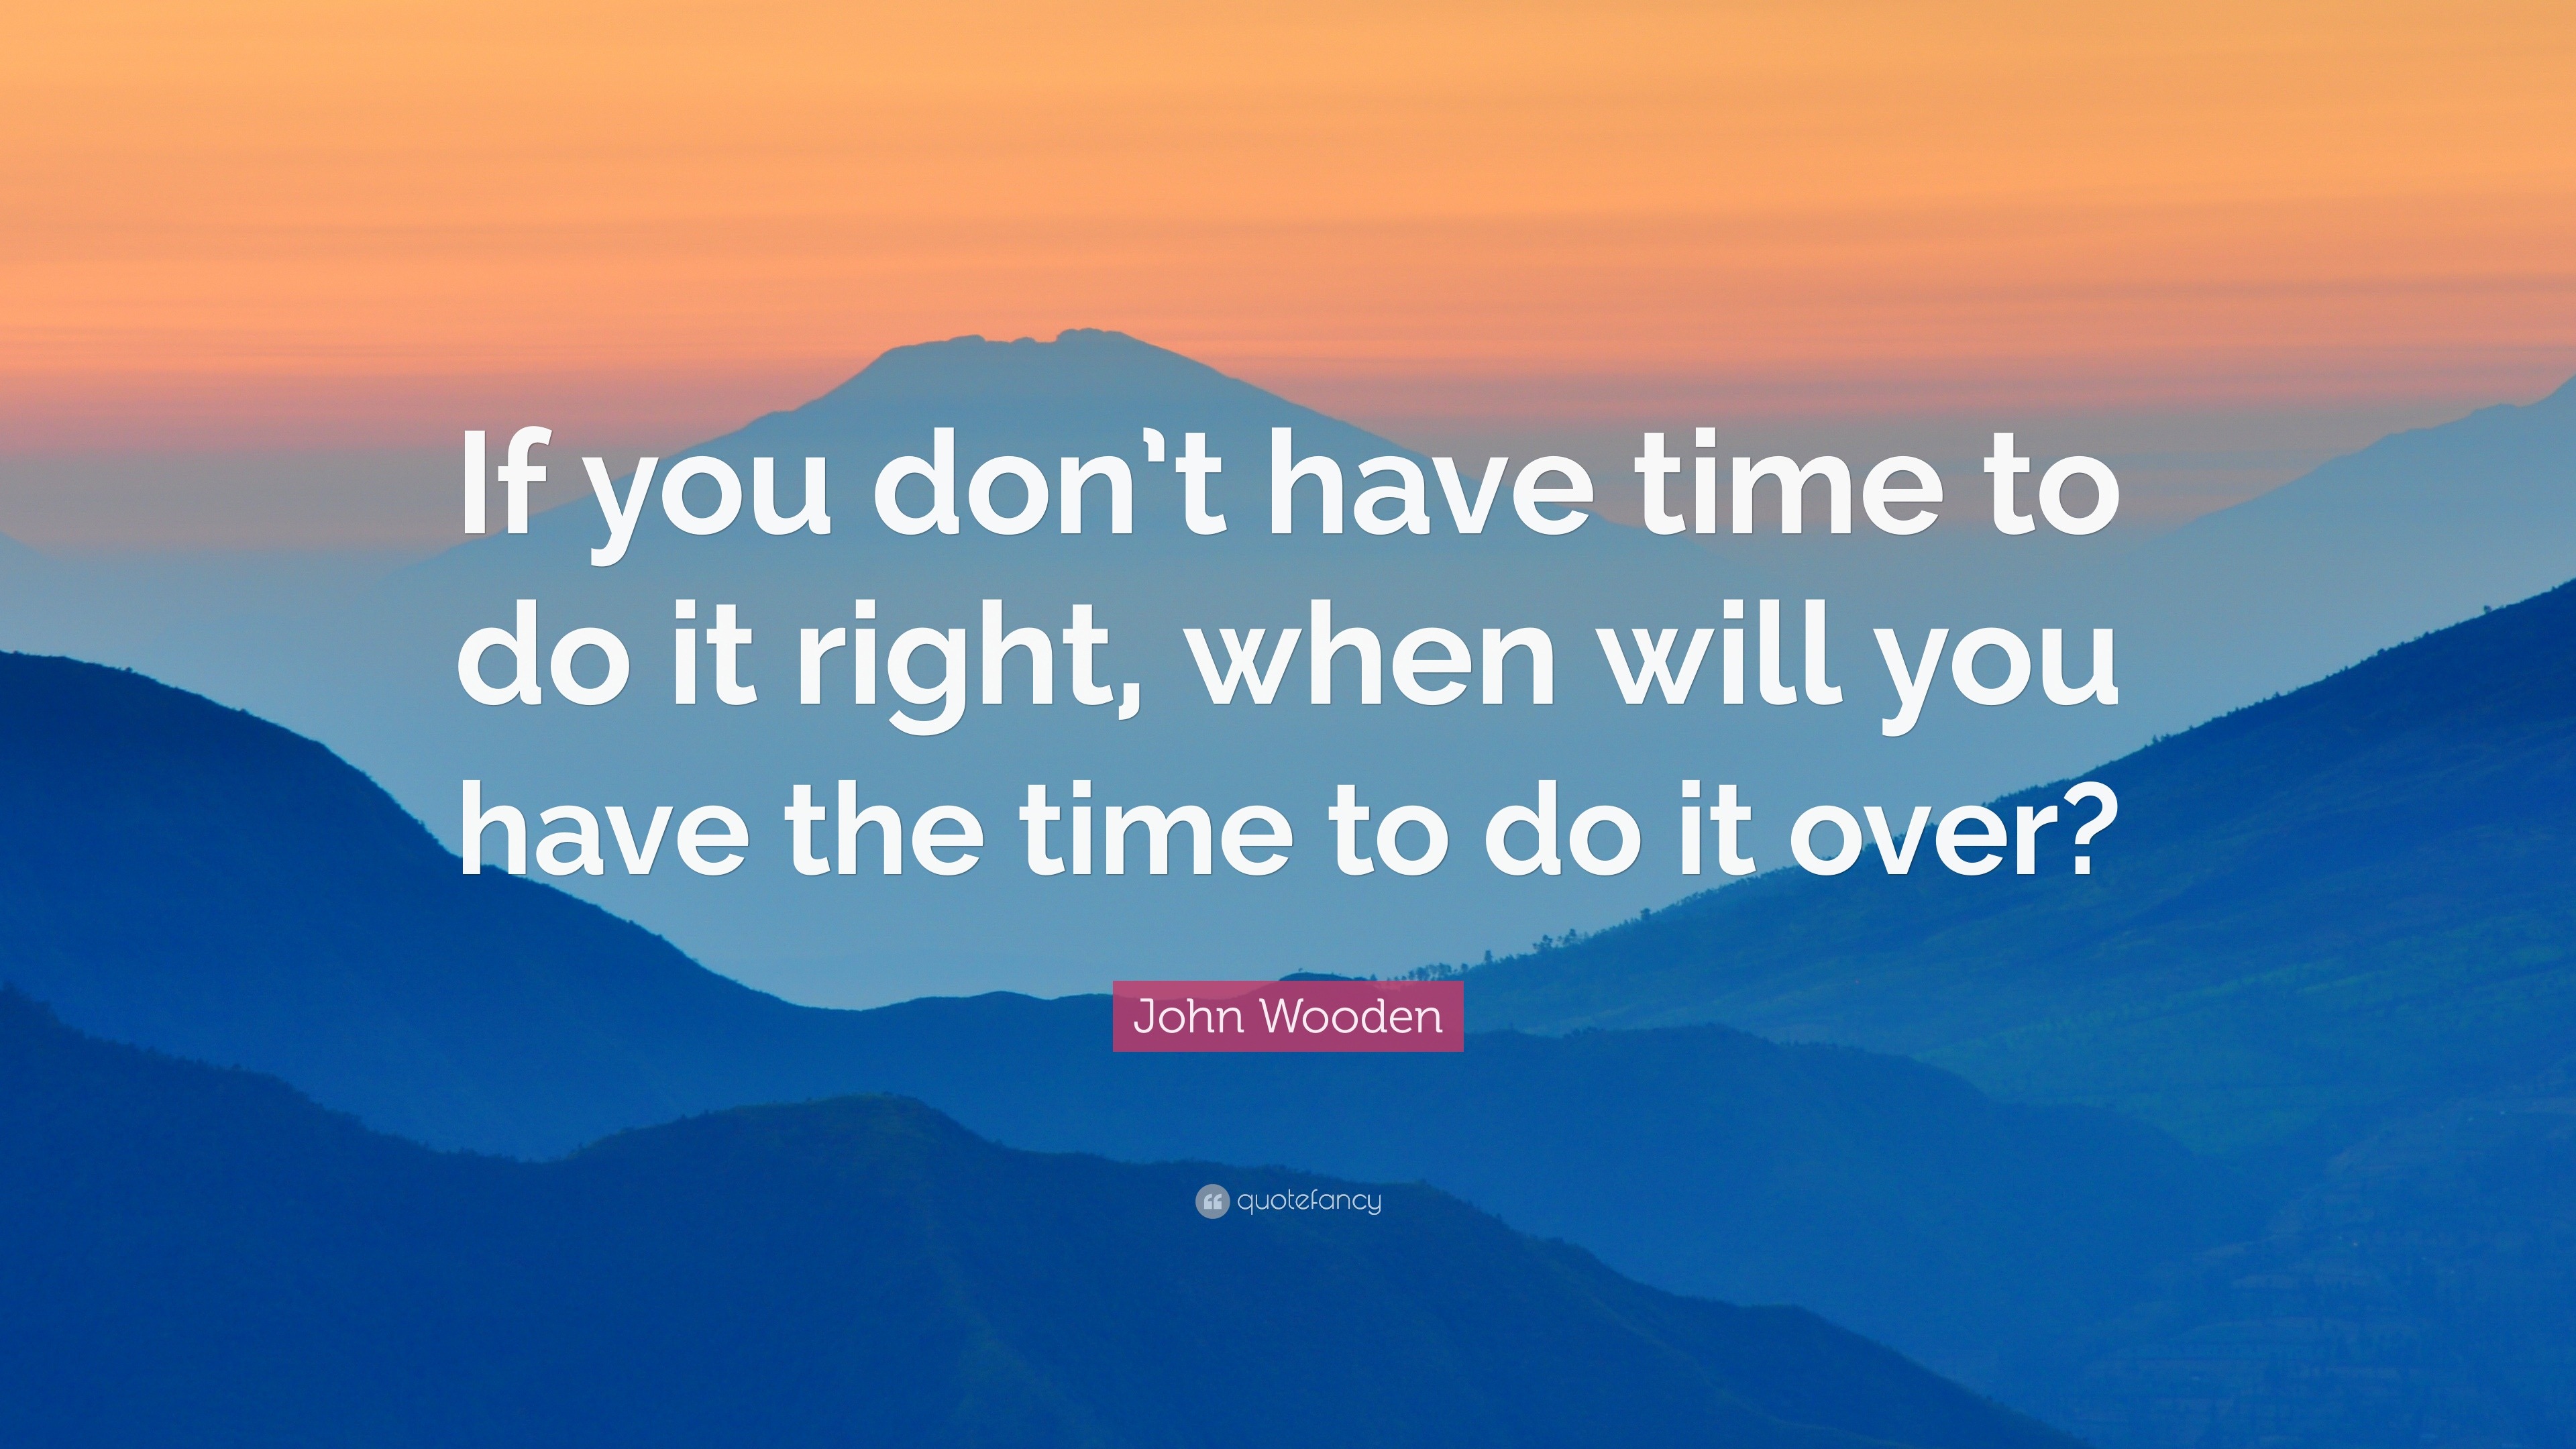 27787 John Wooden Quote If you don t have time to do it right when will